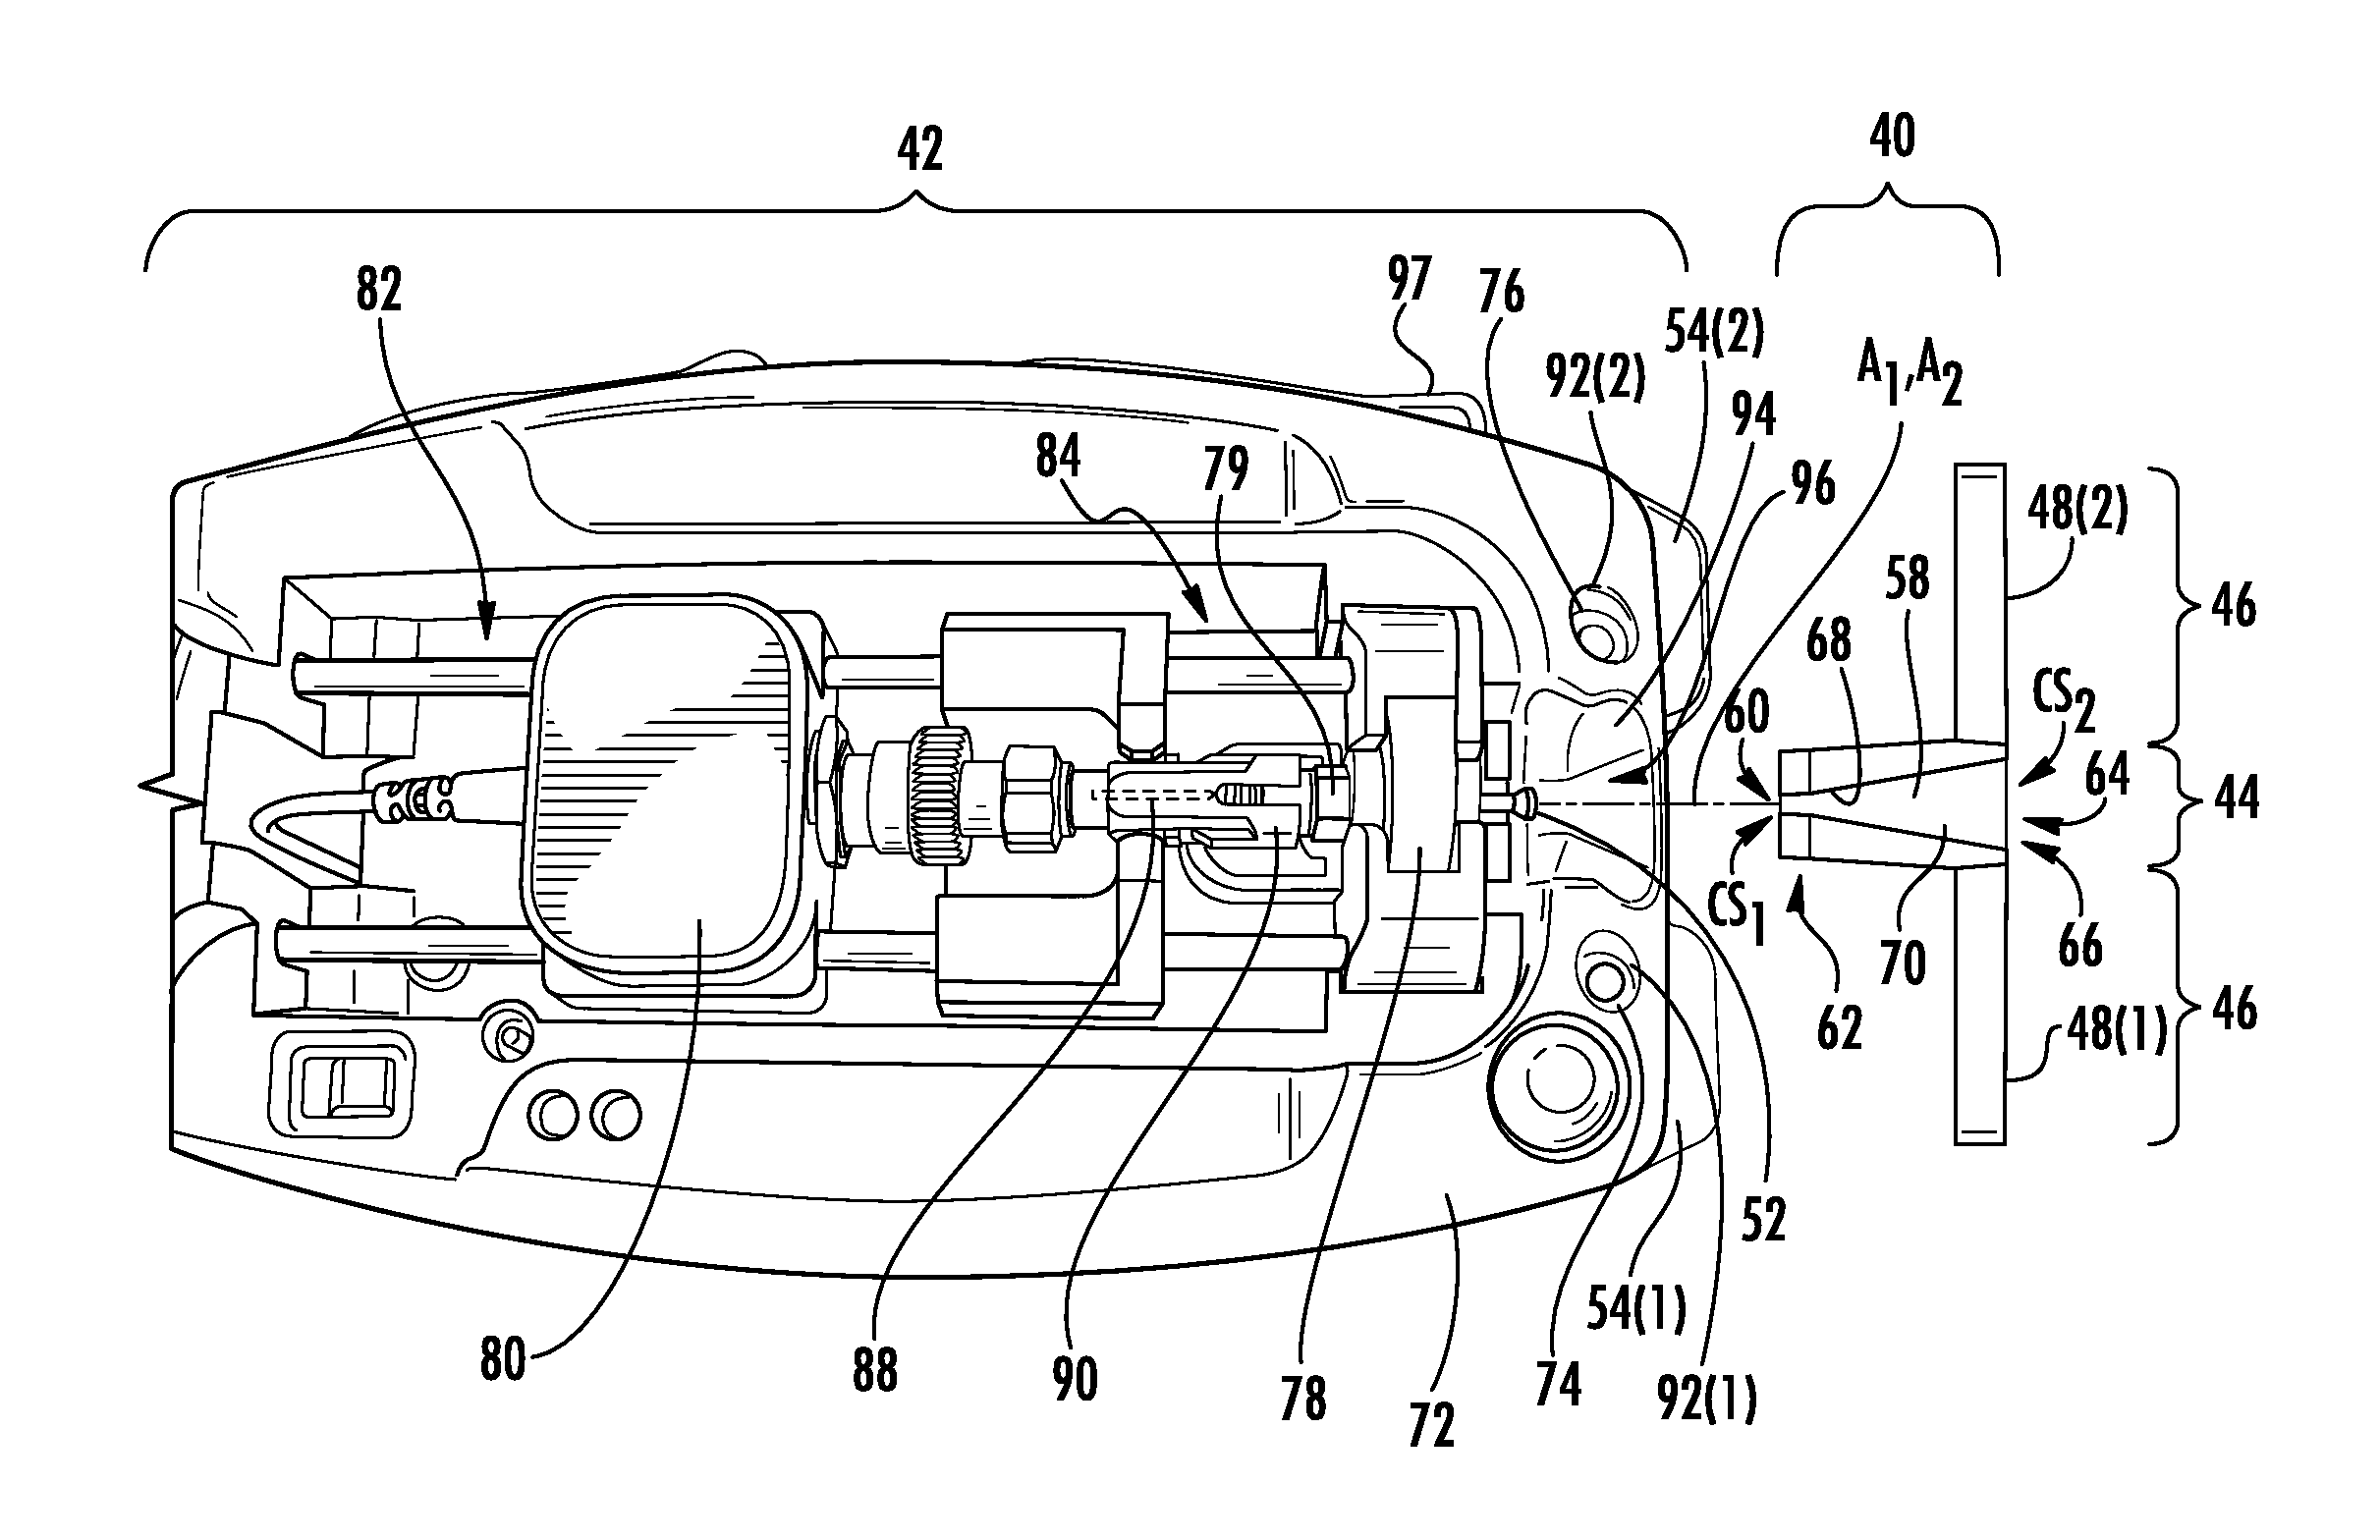 Detachable optical fiber guides for splice connector installation tools, and related assemblies and methods